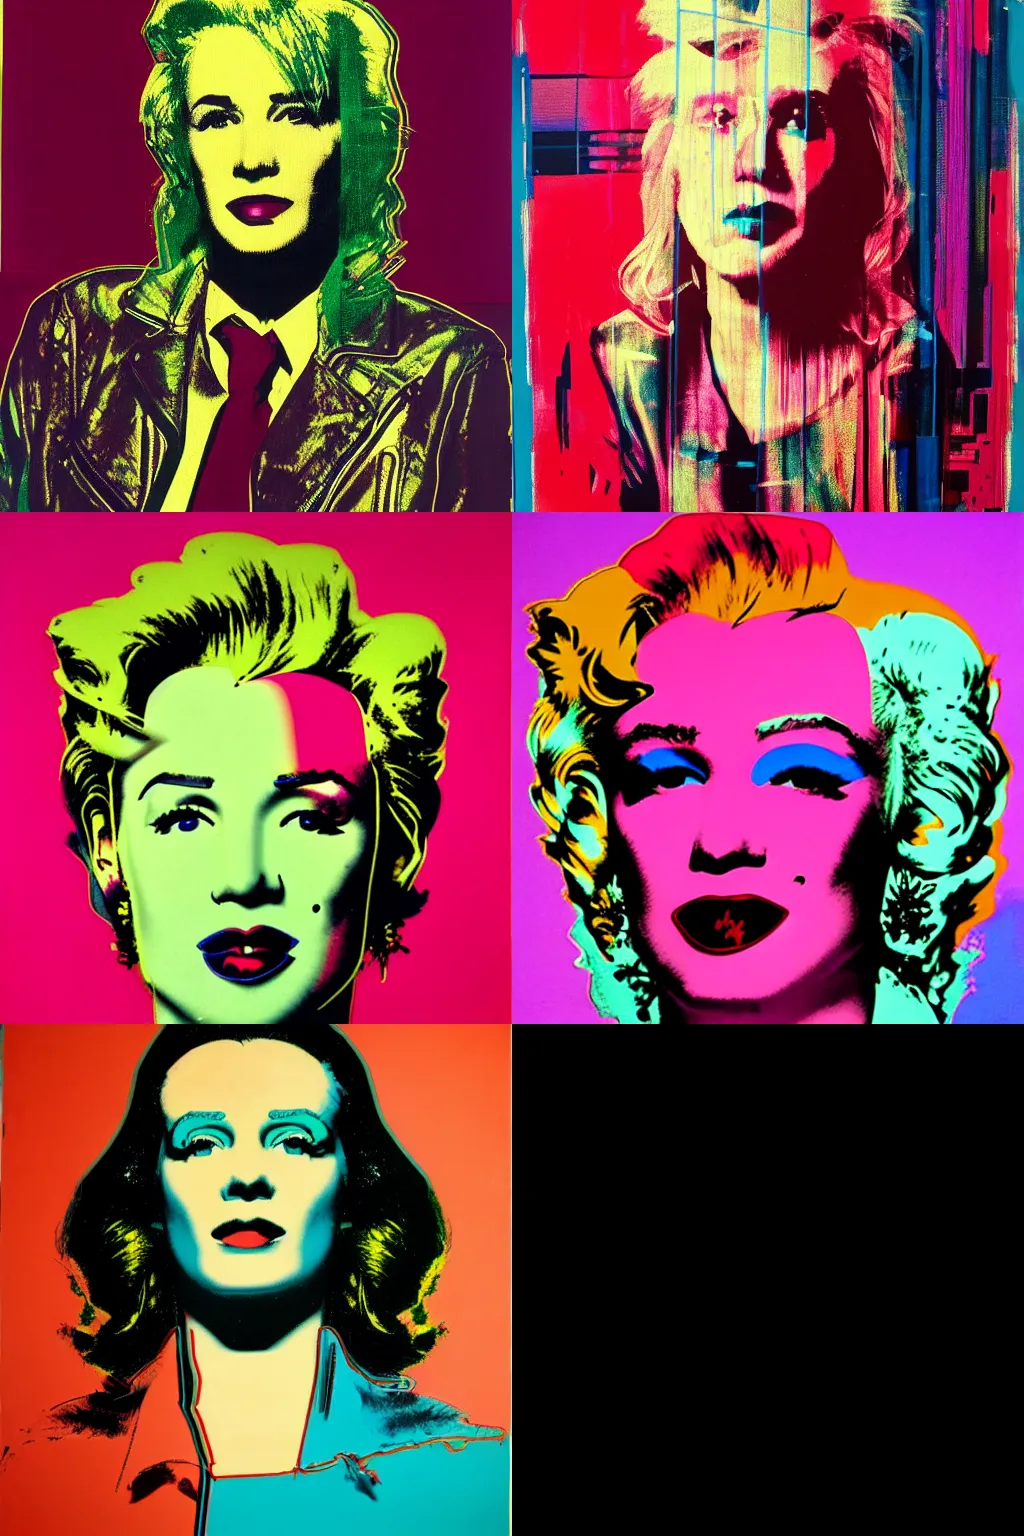 Prompt: A cyberpunk portrait painted by Andy Warhol